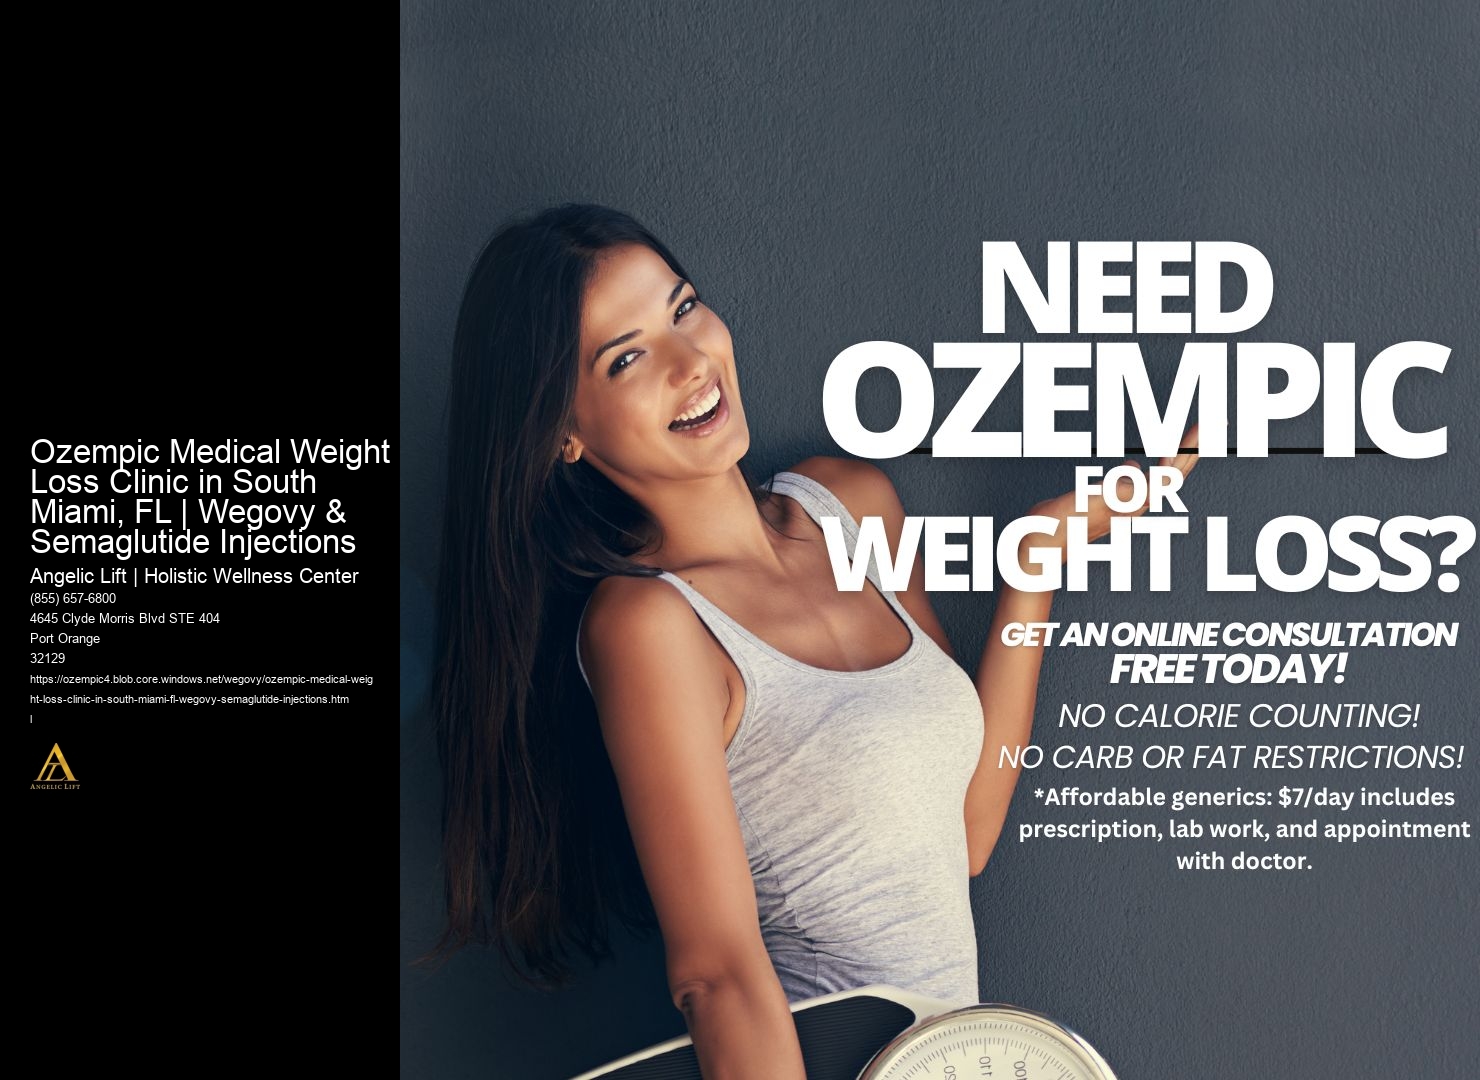 Ozempic Medical Weight Loss Clinic in South Miami, FL | Wegovy & Semaglutide Injections